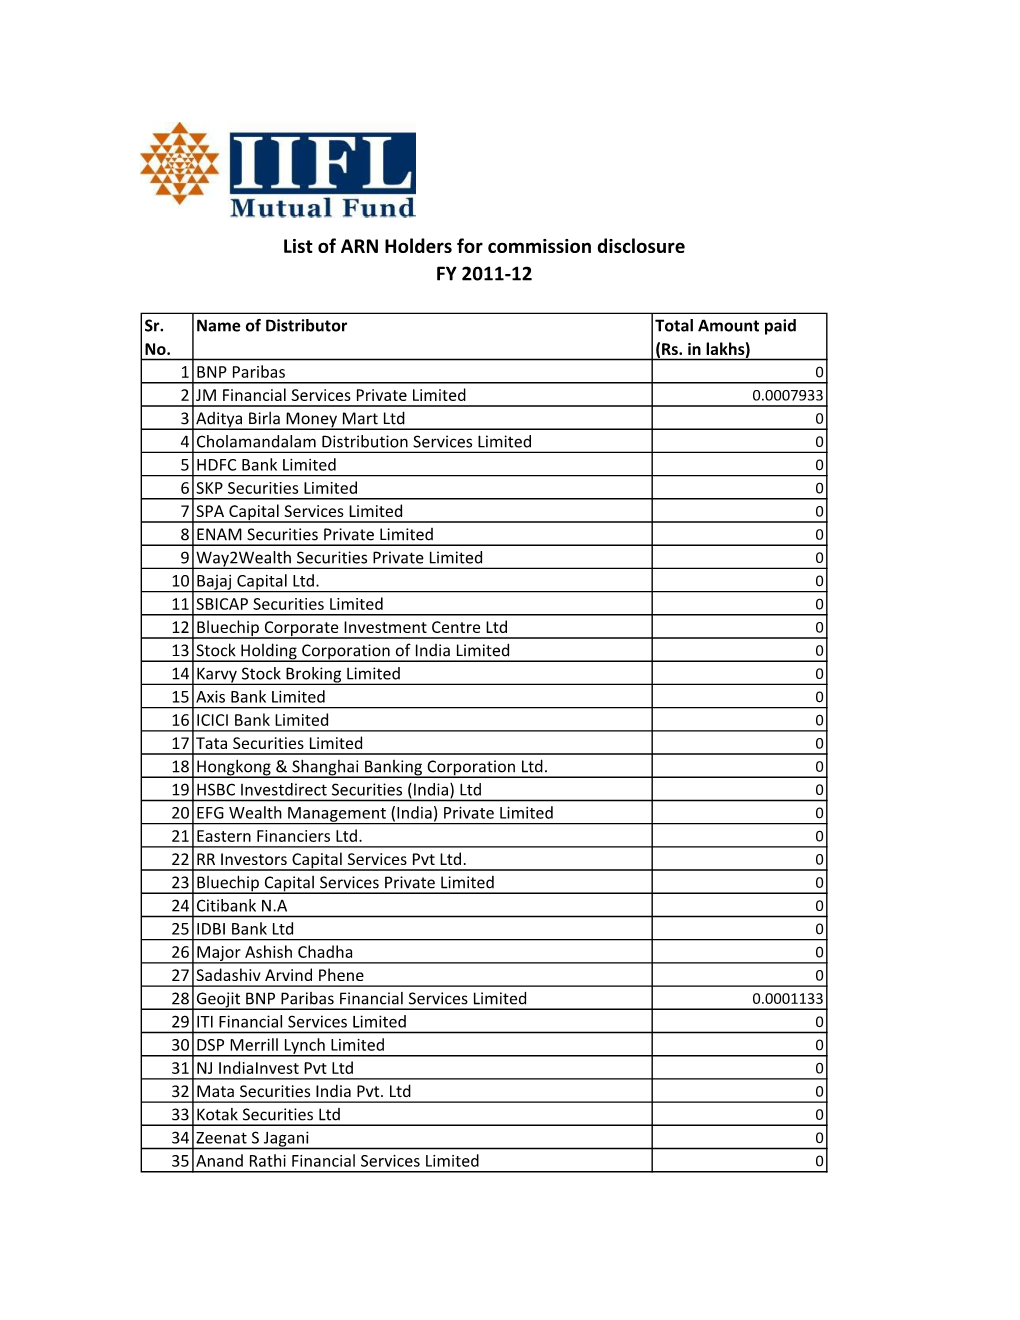 List of ARN Holders for Commission Disclosure FY 2011-12